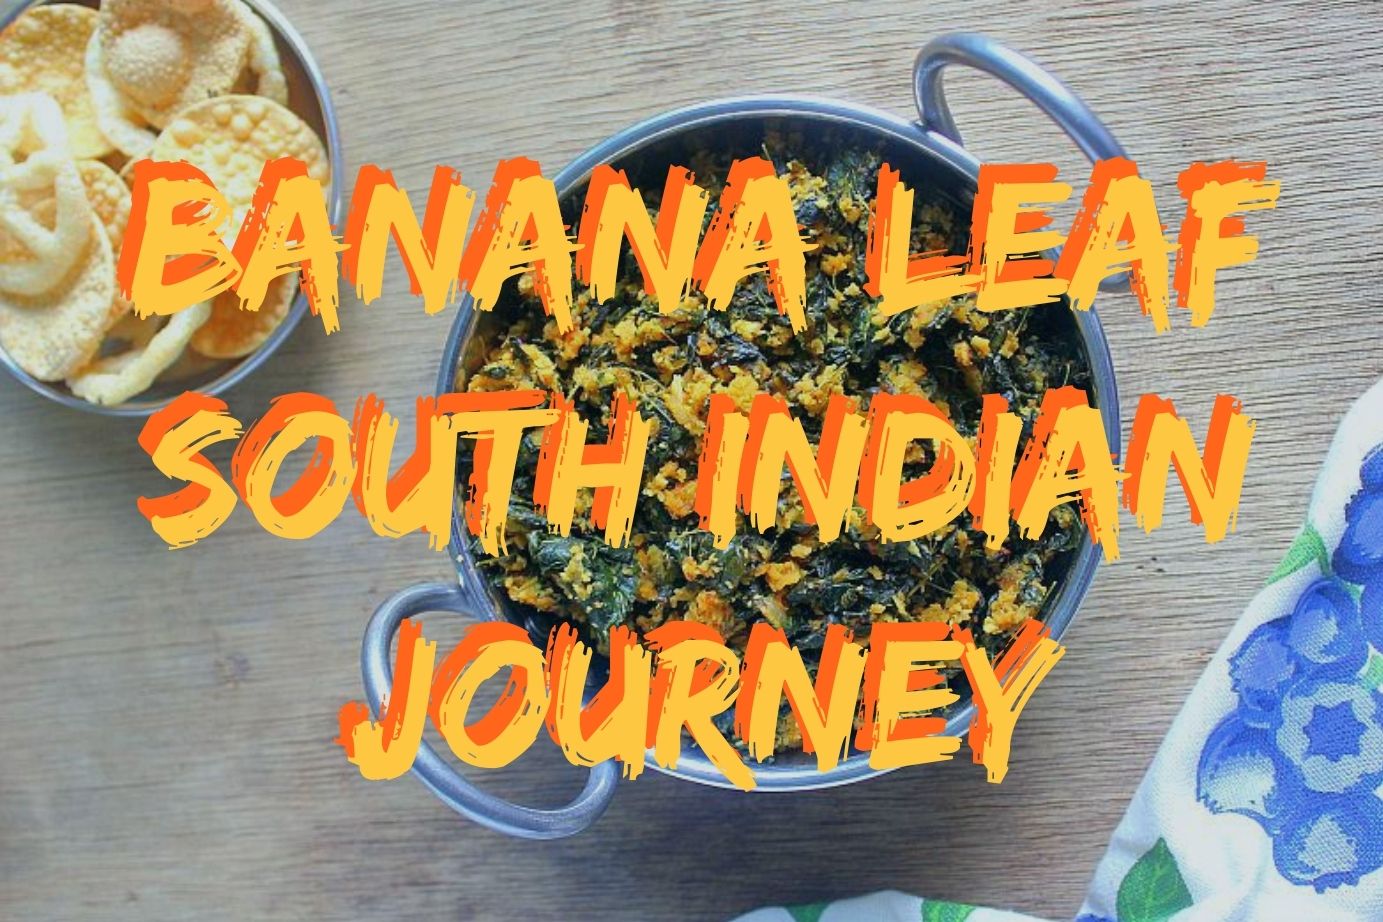 South Indian Culinary Experience